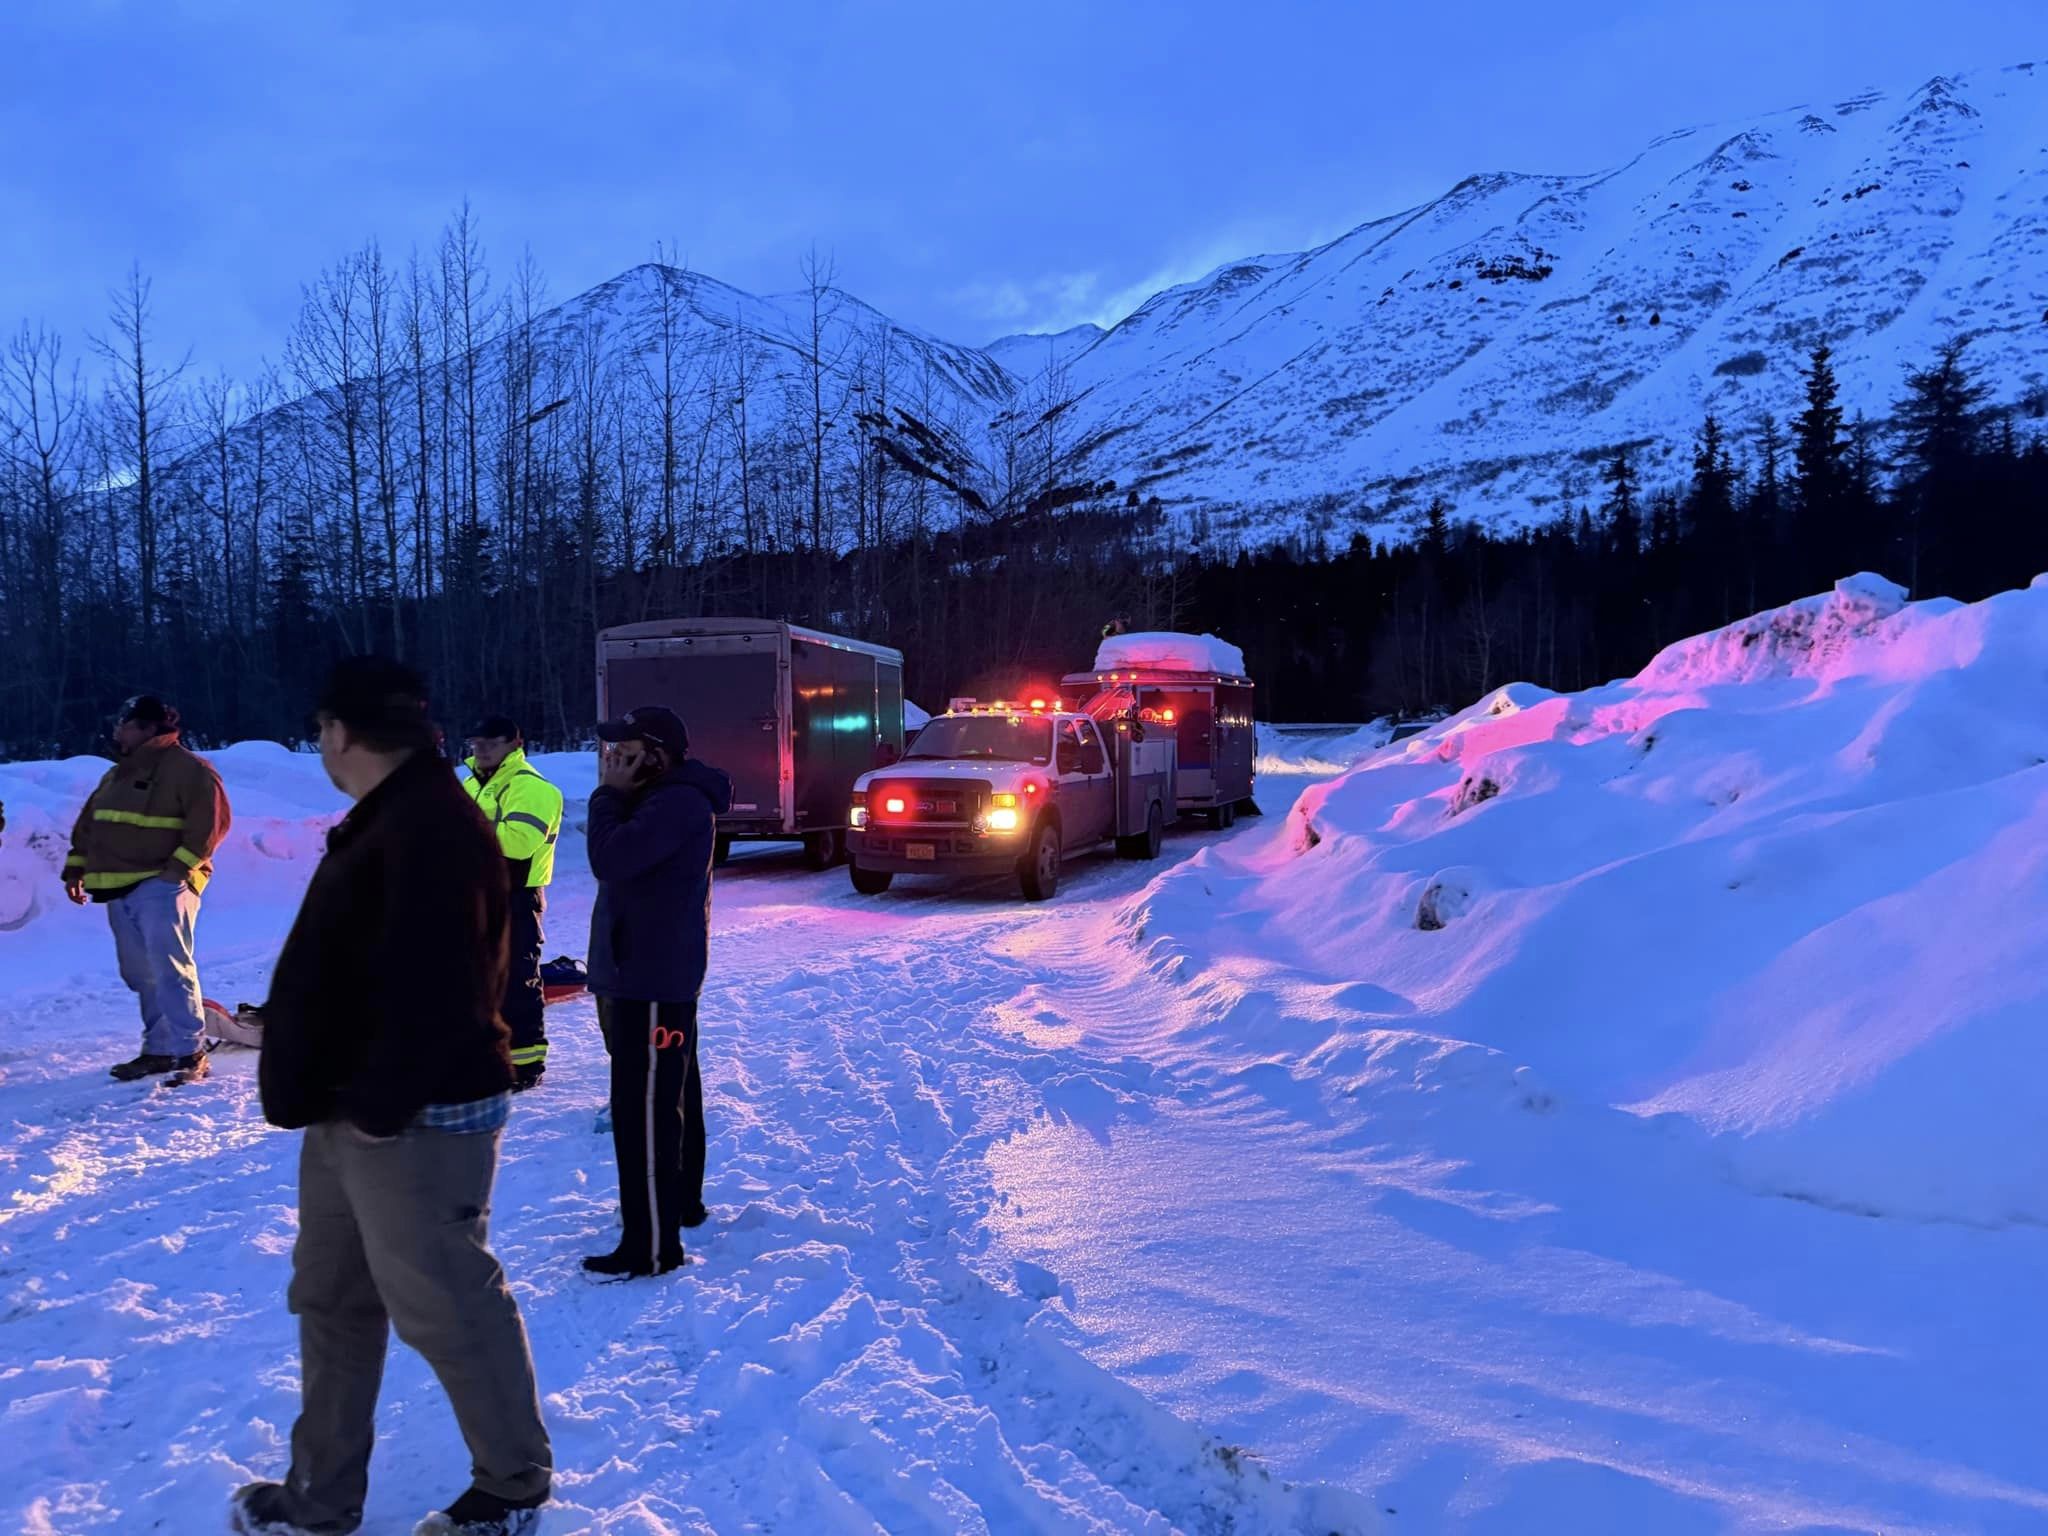 Emergency first responders stand in a snowy pullout next to emergency vehicles at dusk. Snow covered mountains in the background.